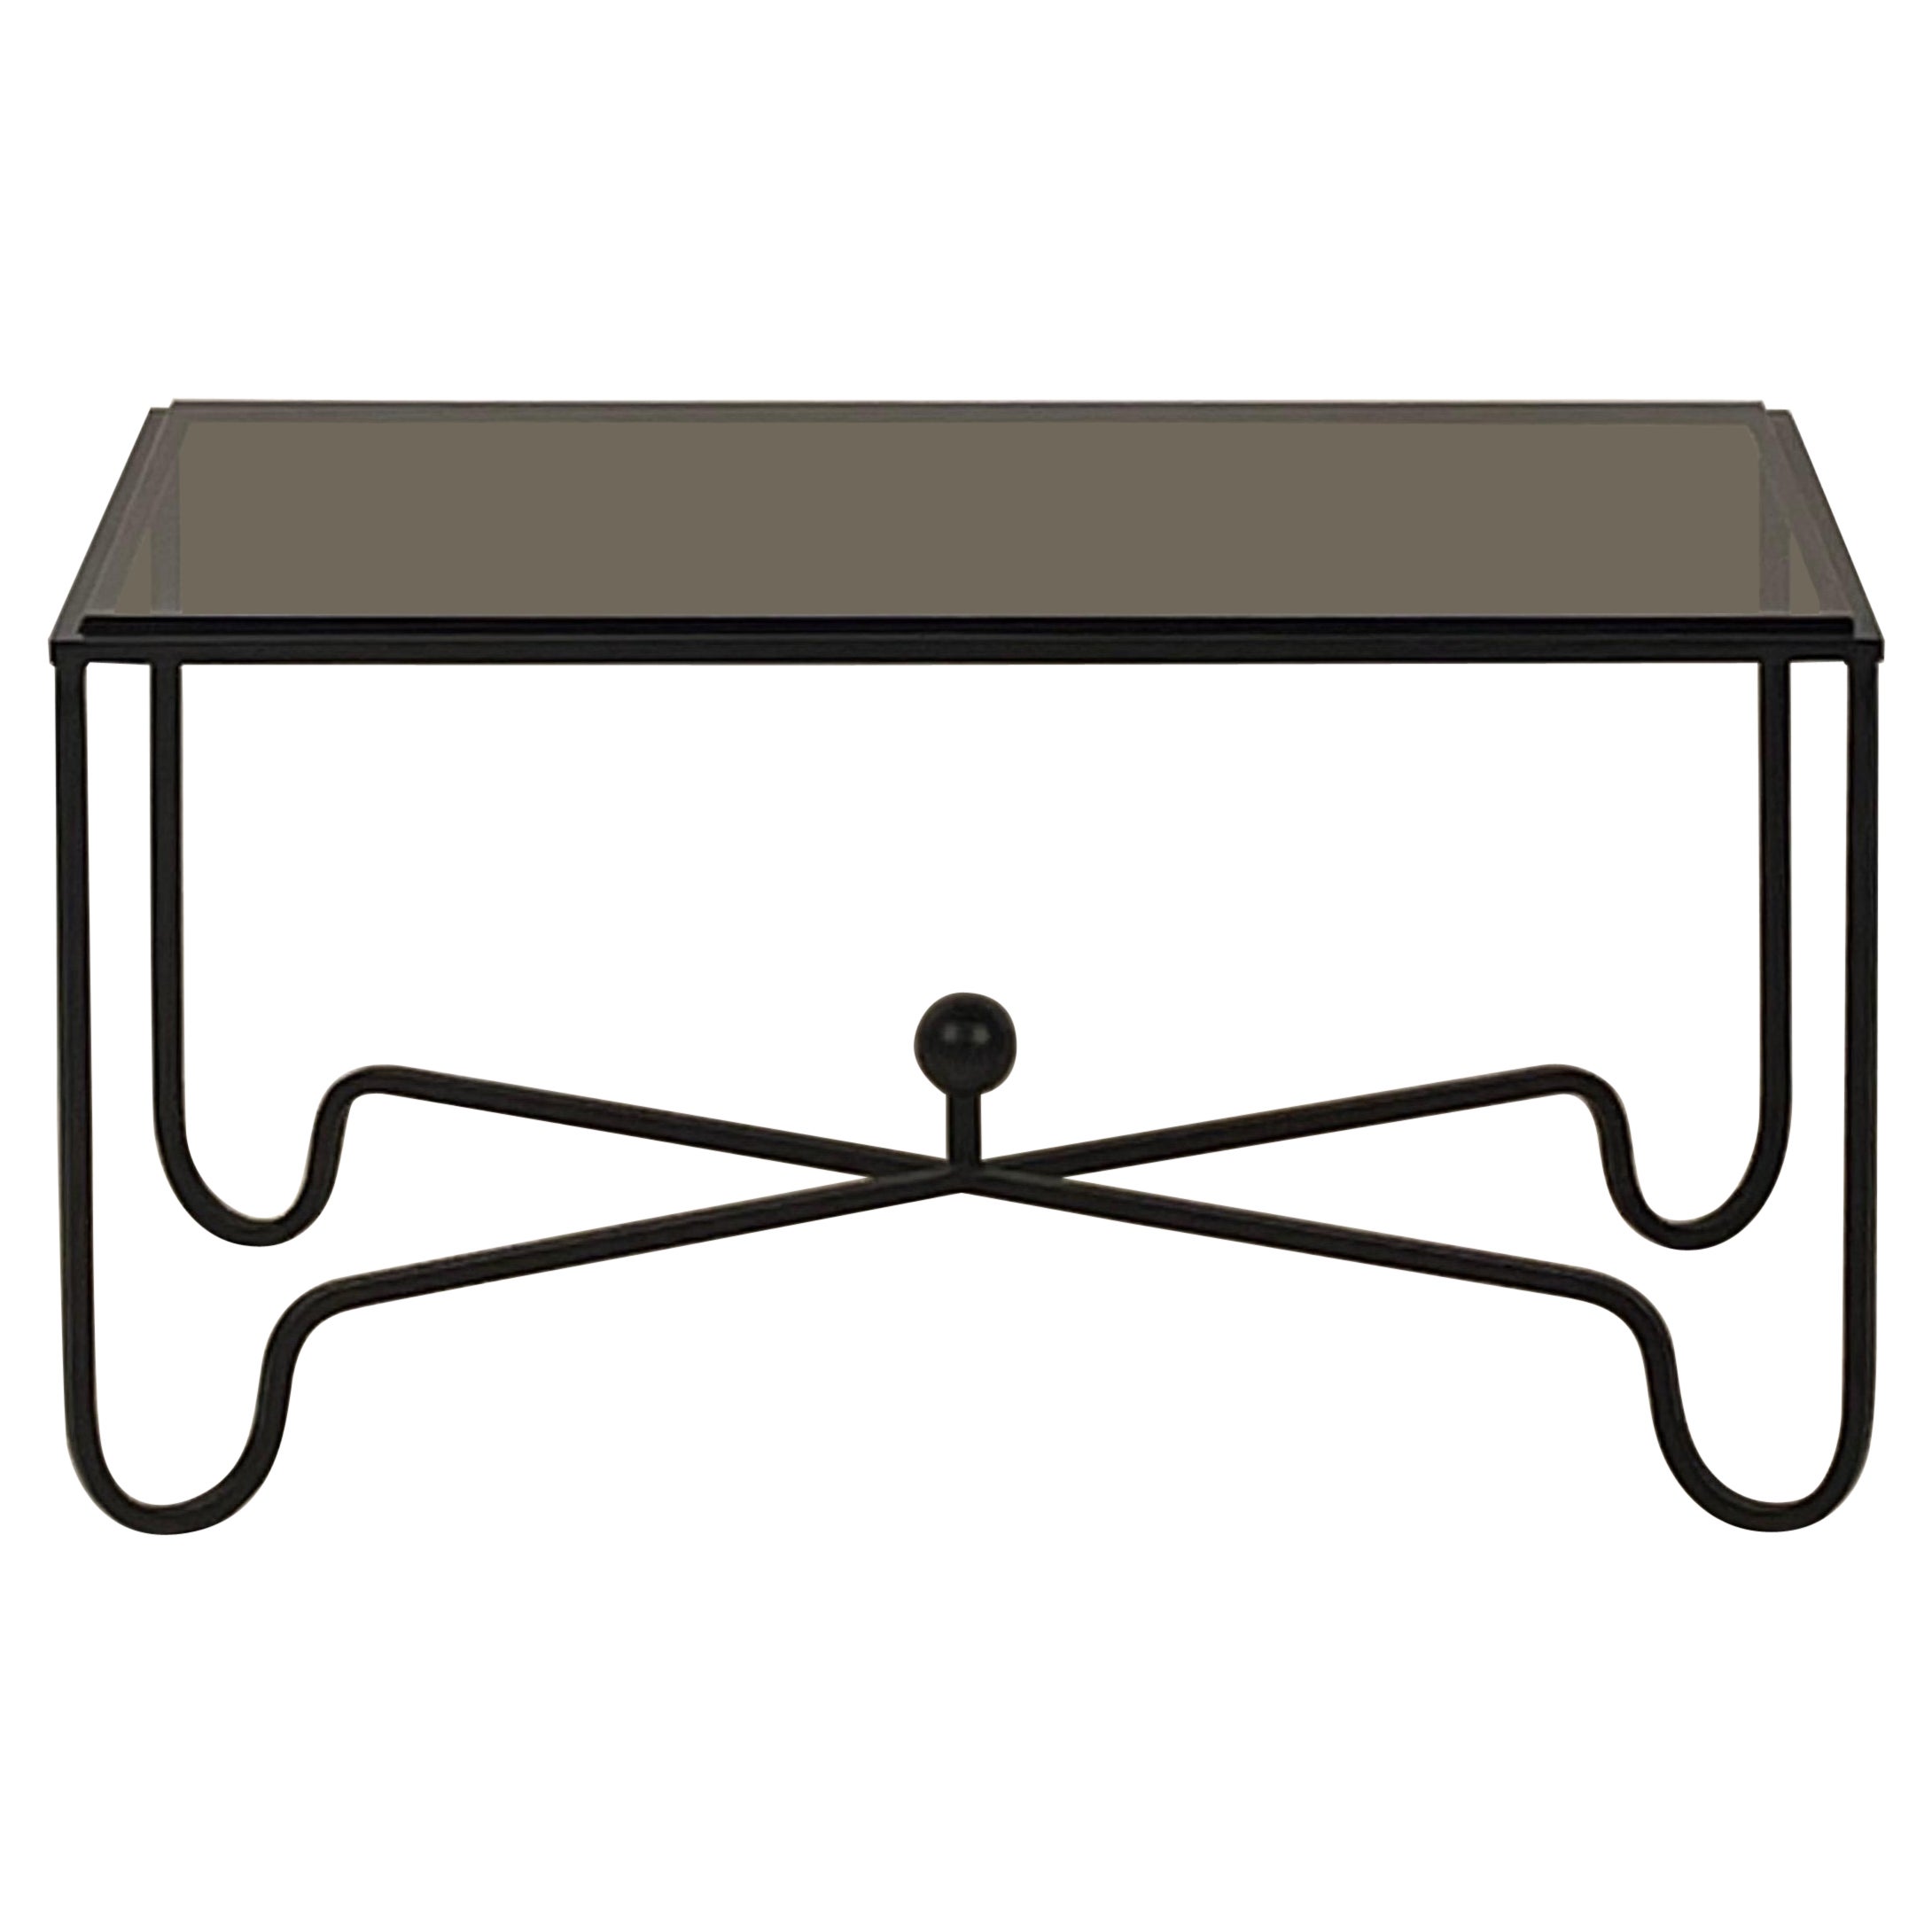 Large Blackened Iron and Glass 'Entretoise' Coffee Table by Design Frères For Sale